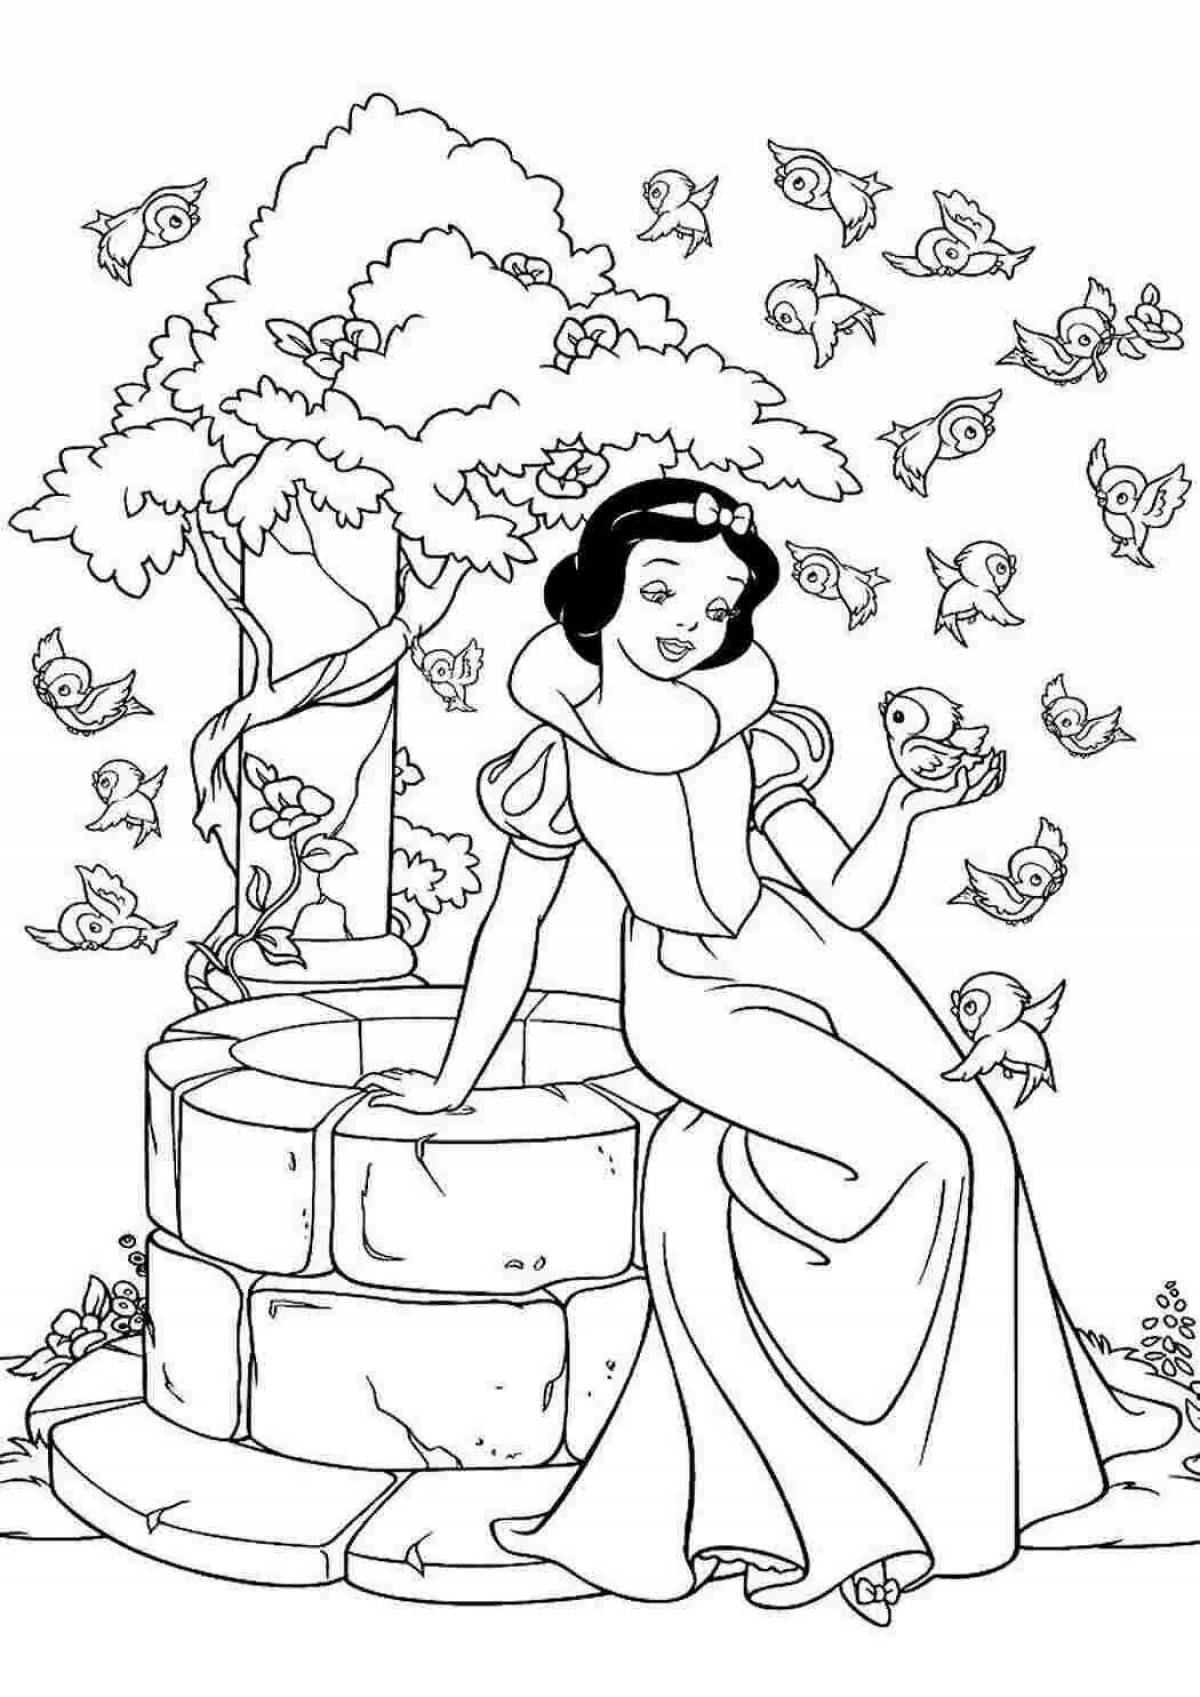 Adorable snow white coloring book for girls